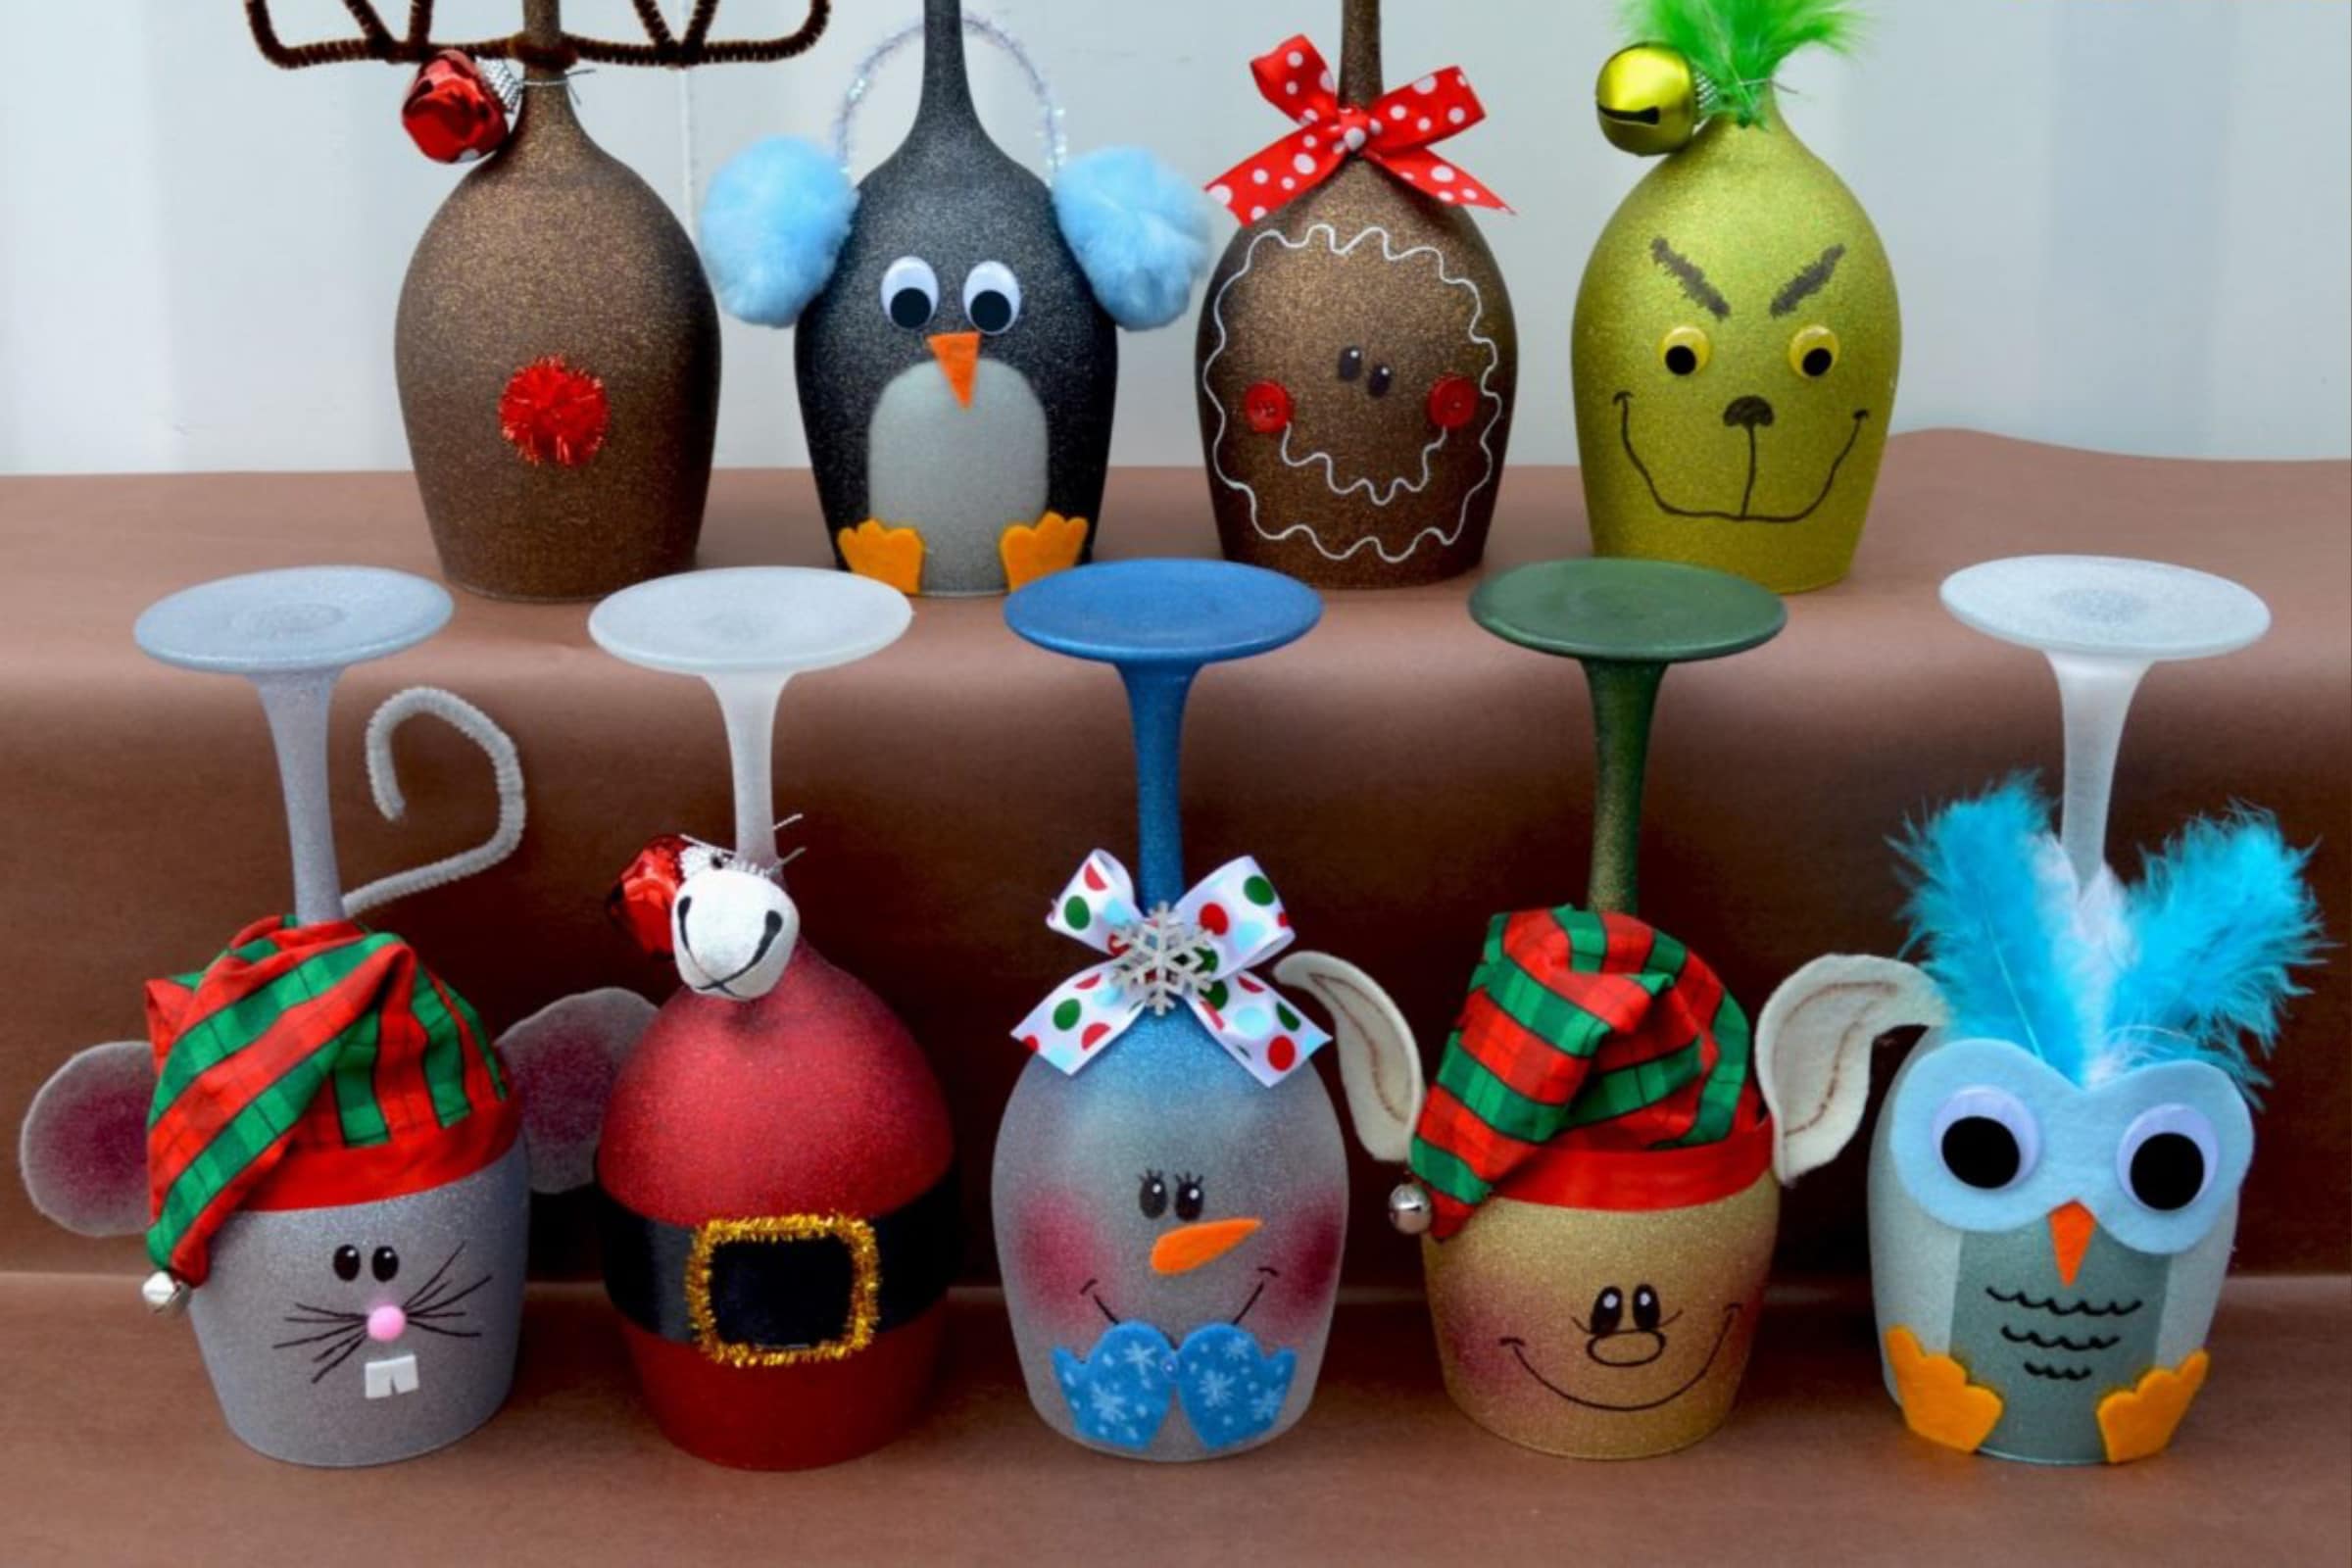 11 Homemade Christmas Decorations That